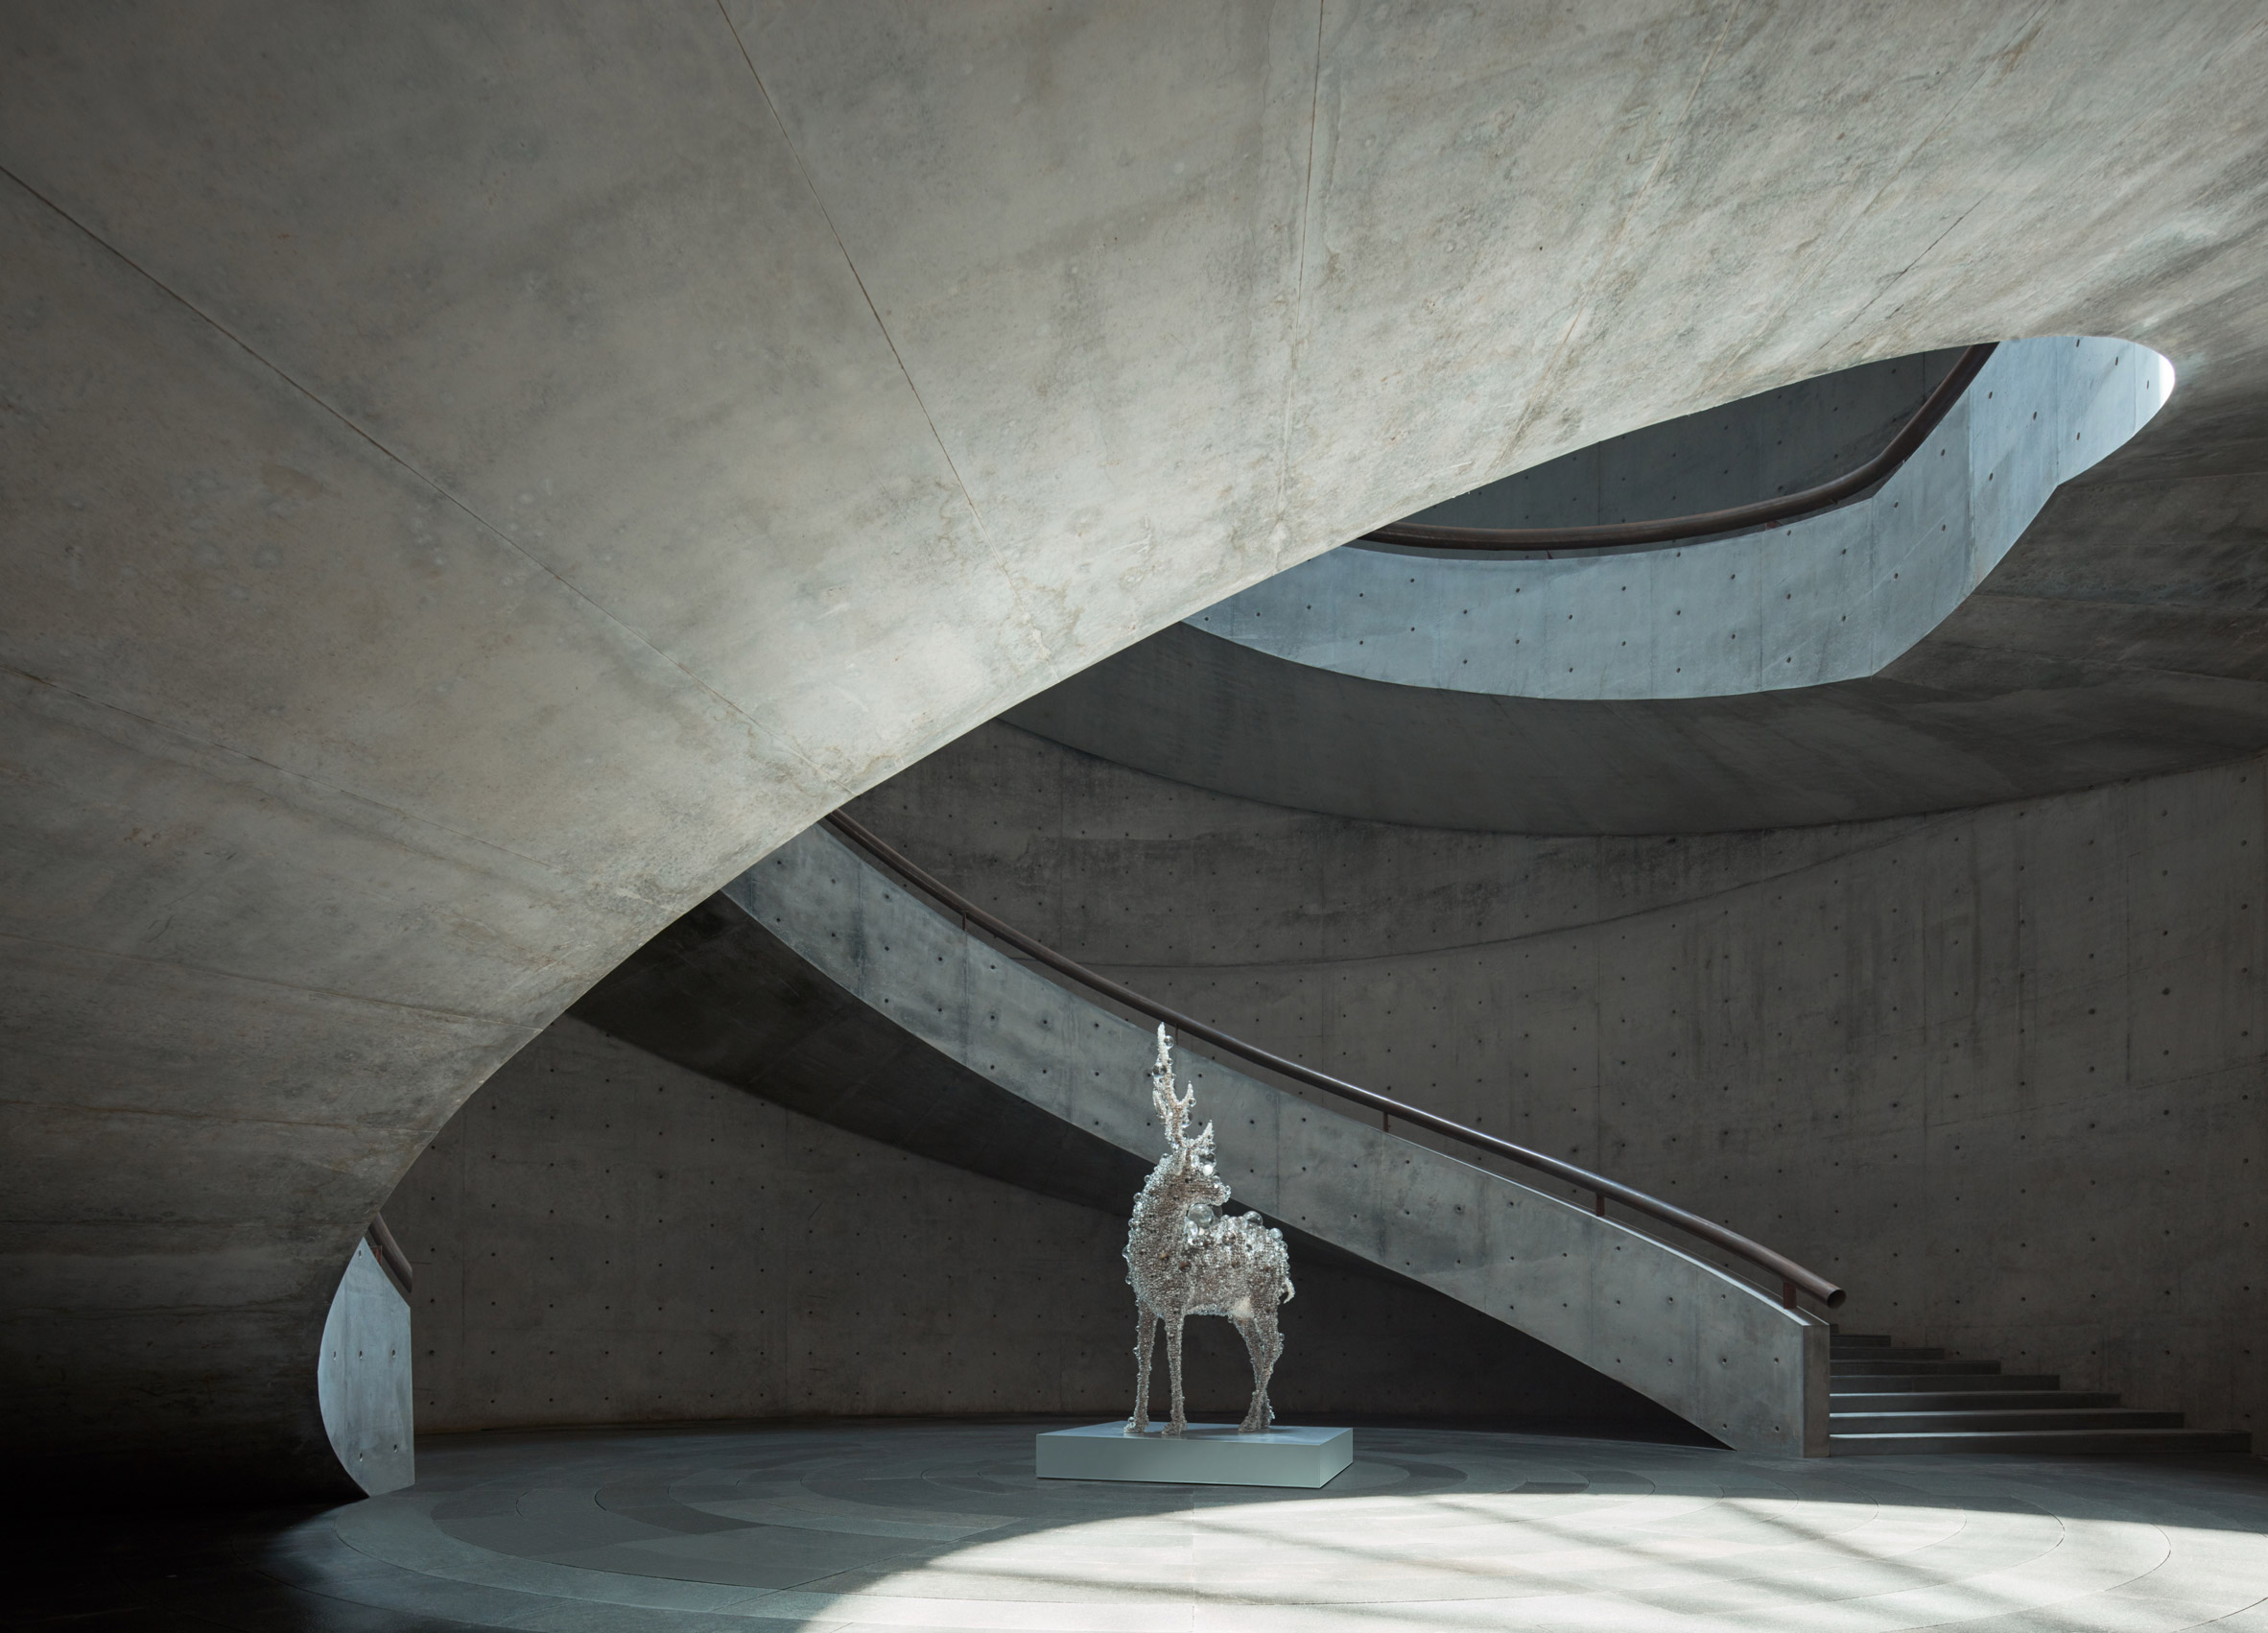 Photos reveal Tadao Ando's completed He Art Museum in China